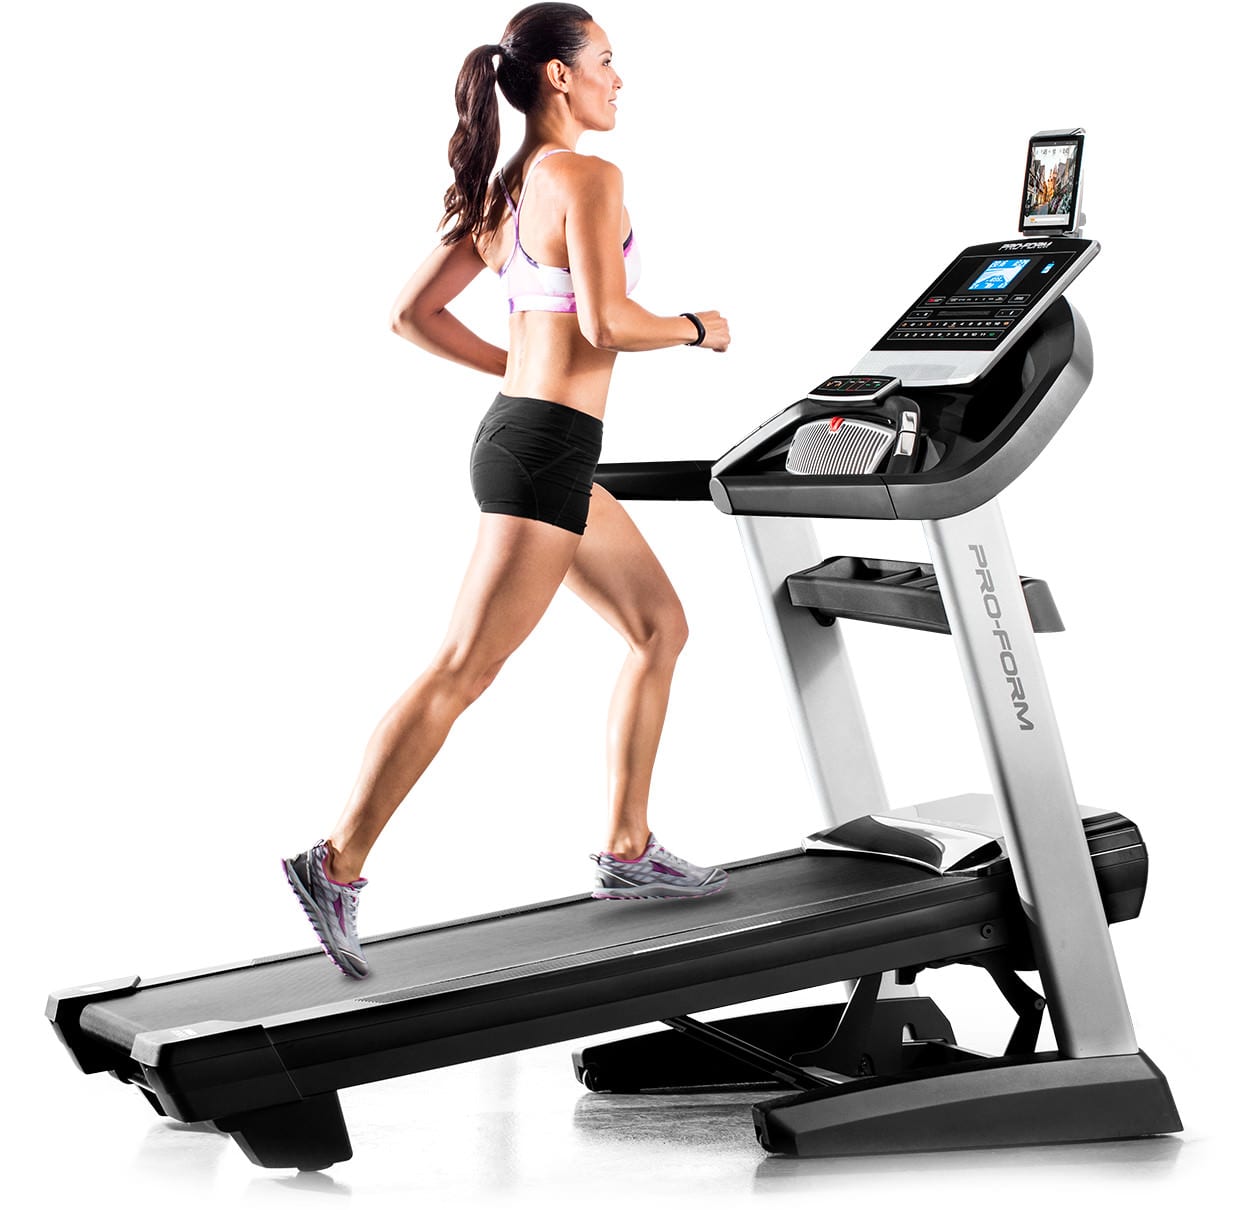 Proform Exercise And Home Fitness Equipment Proform